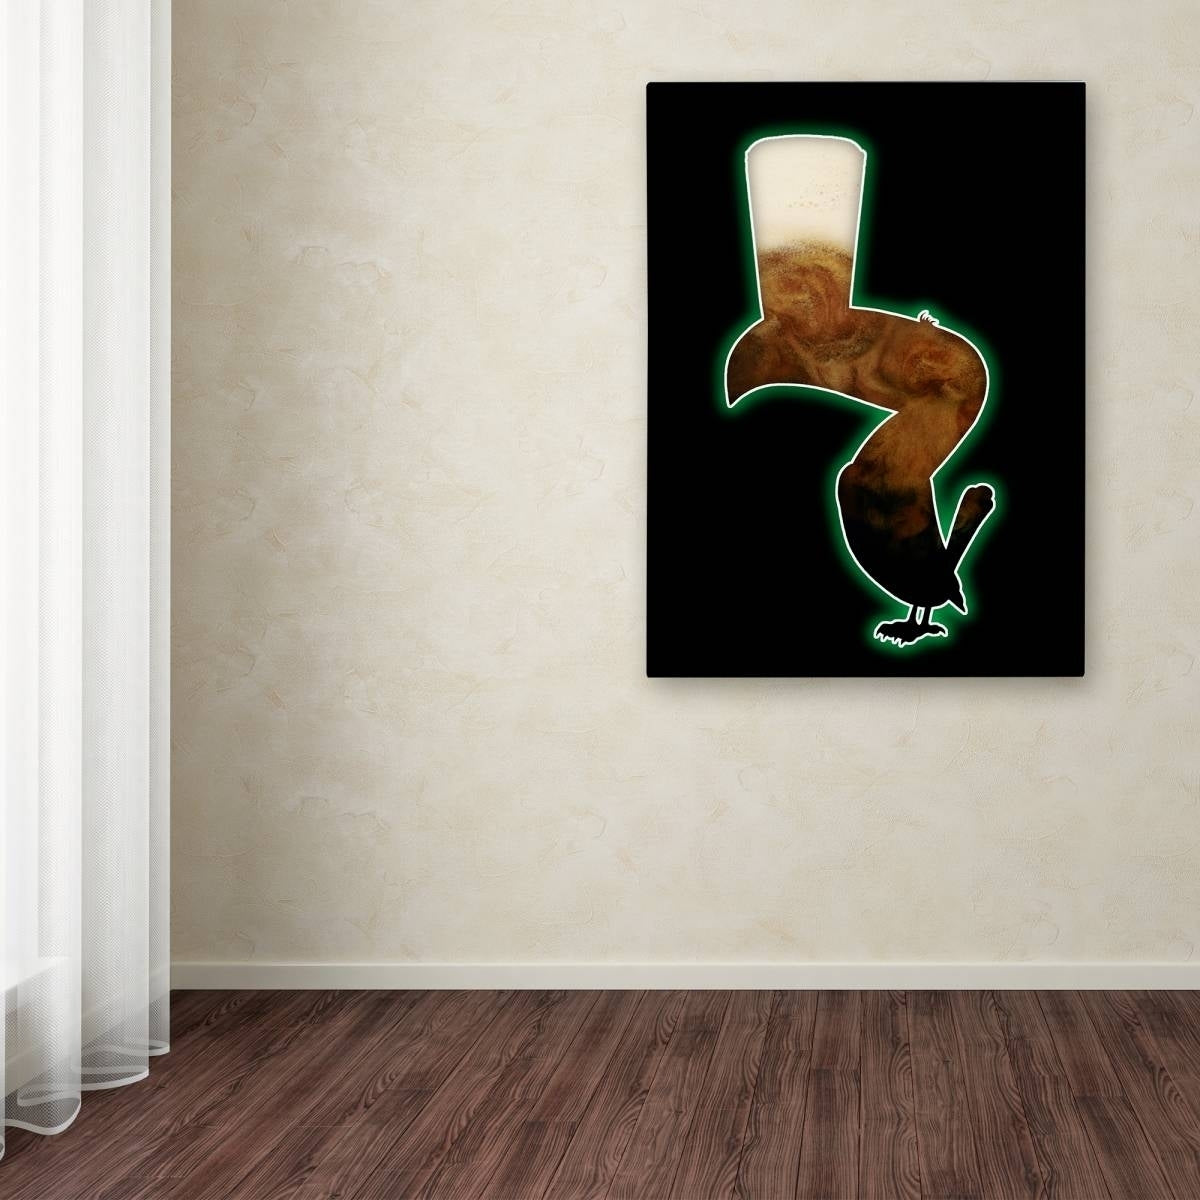 A Guinness Brewery 'Guinness X' canvas art showcasing a St. Patrick's Day hat on a black wall.